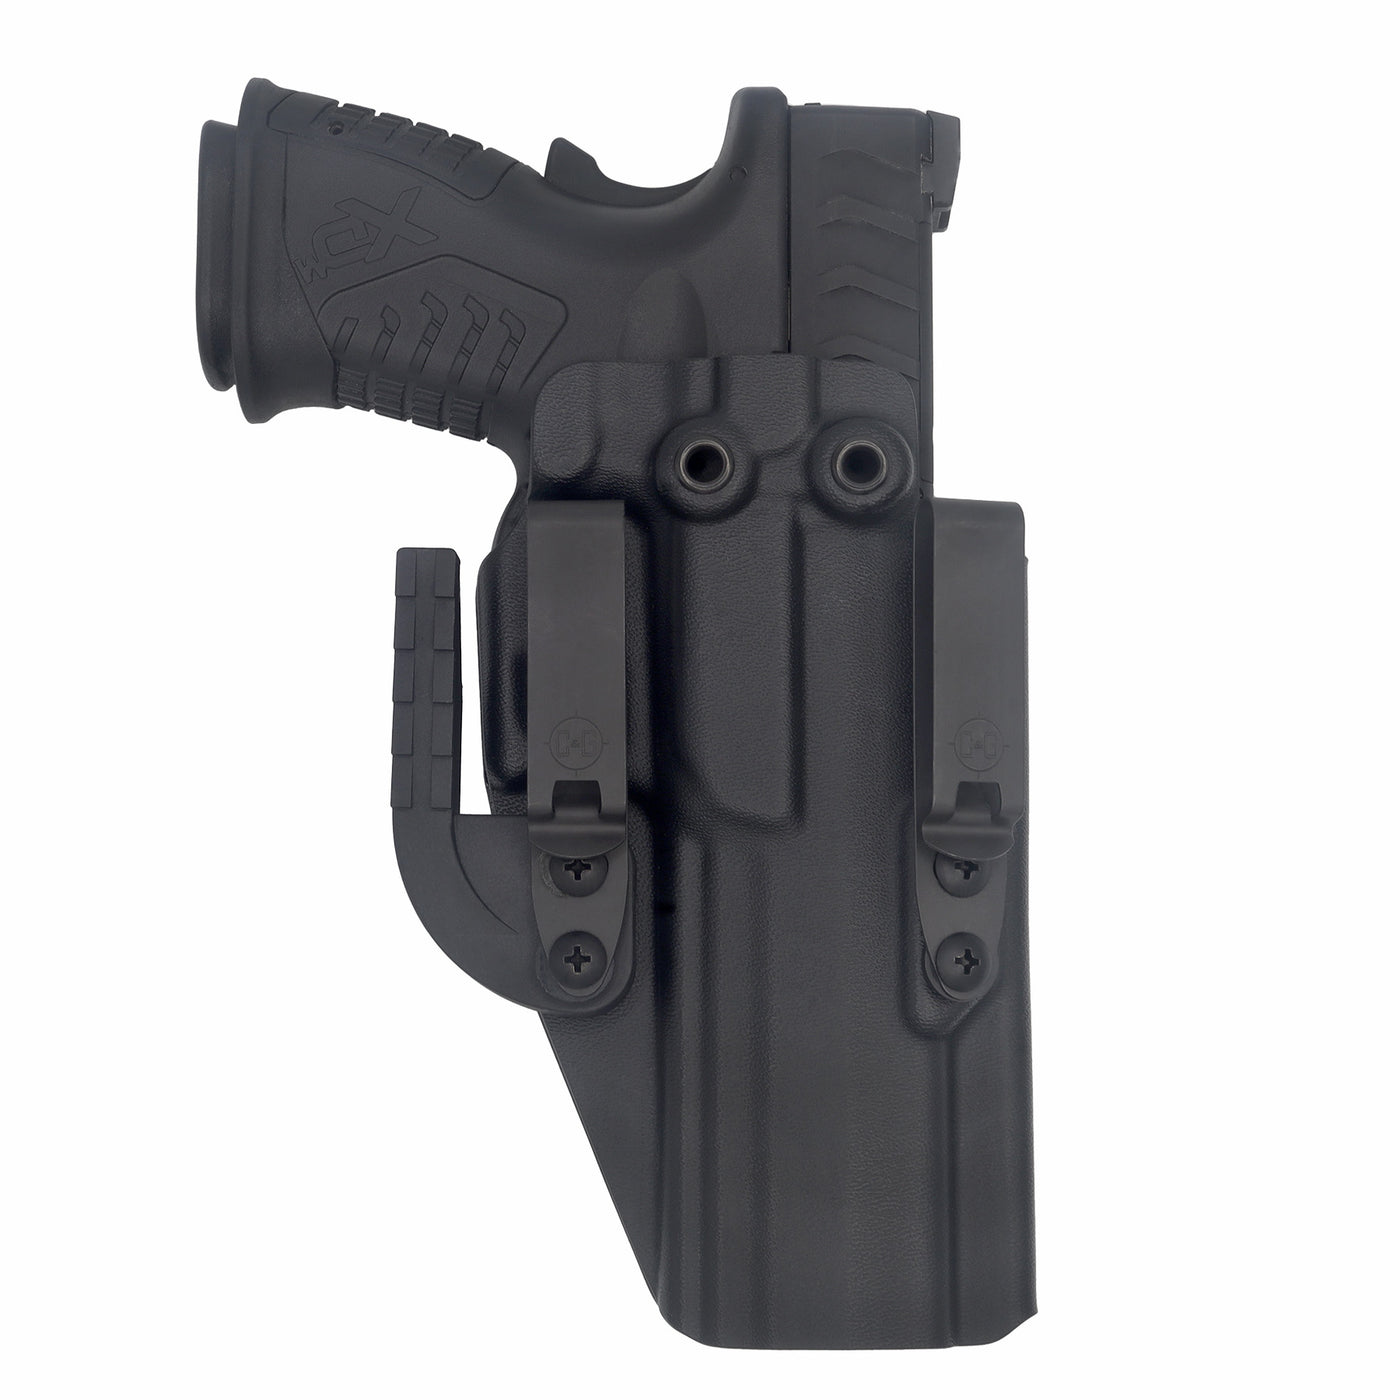 C&G Holsters Quickship IWB ALPHA UPGRADE Covert Springfield XDm 5.25" in holstered position